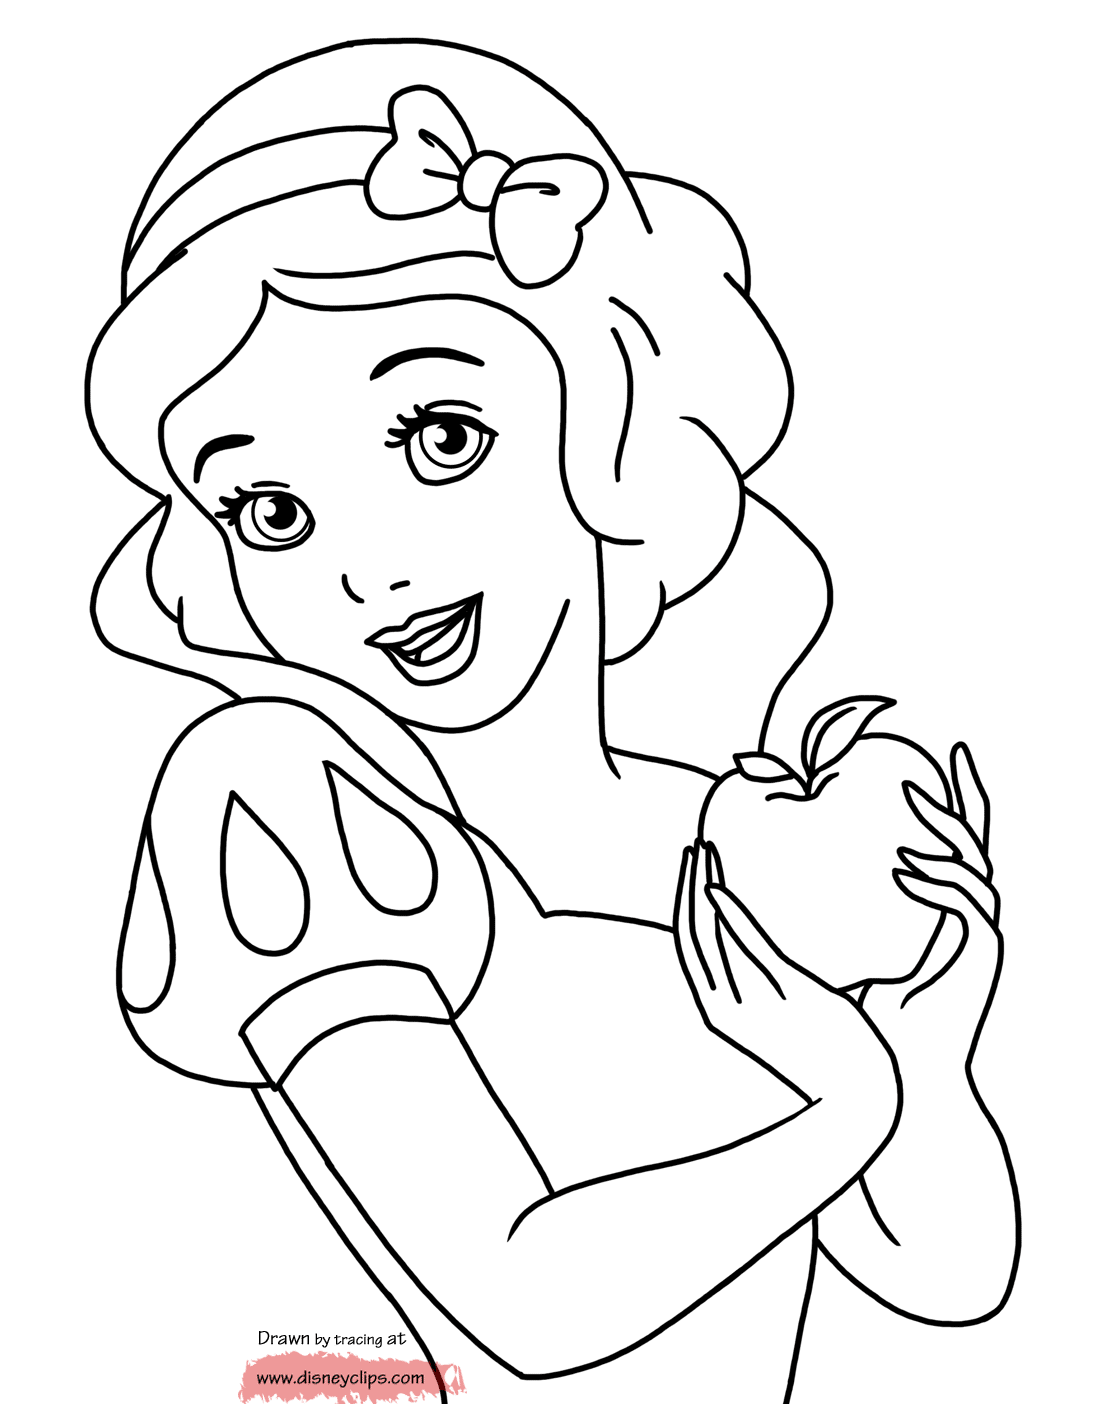 free snow white coloring pages snow white coloring pages disneyclipscom coloring white pages free snow 